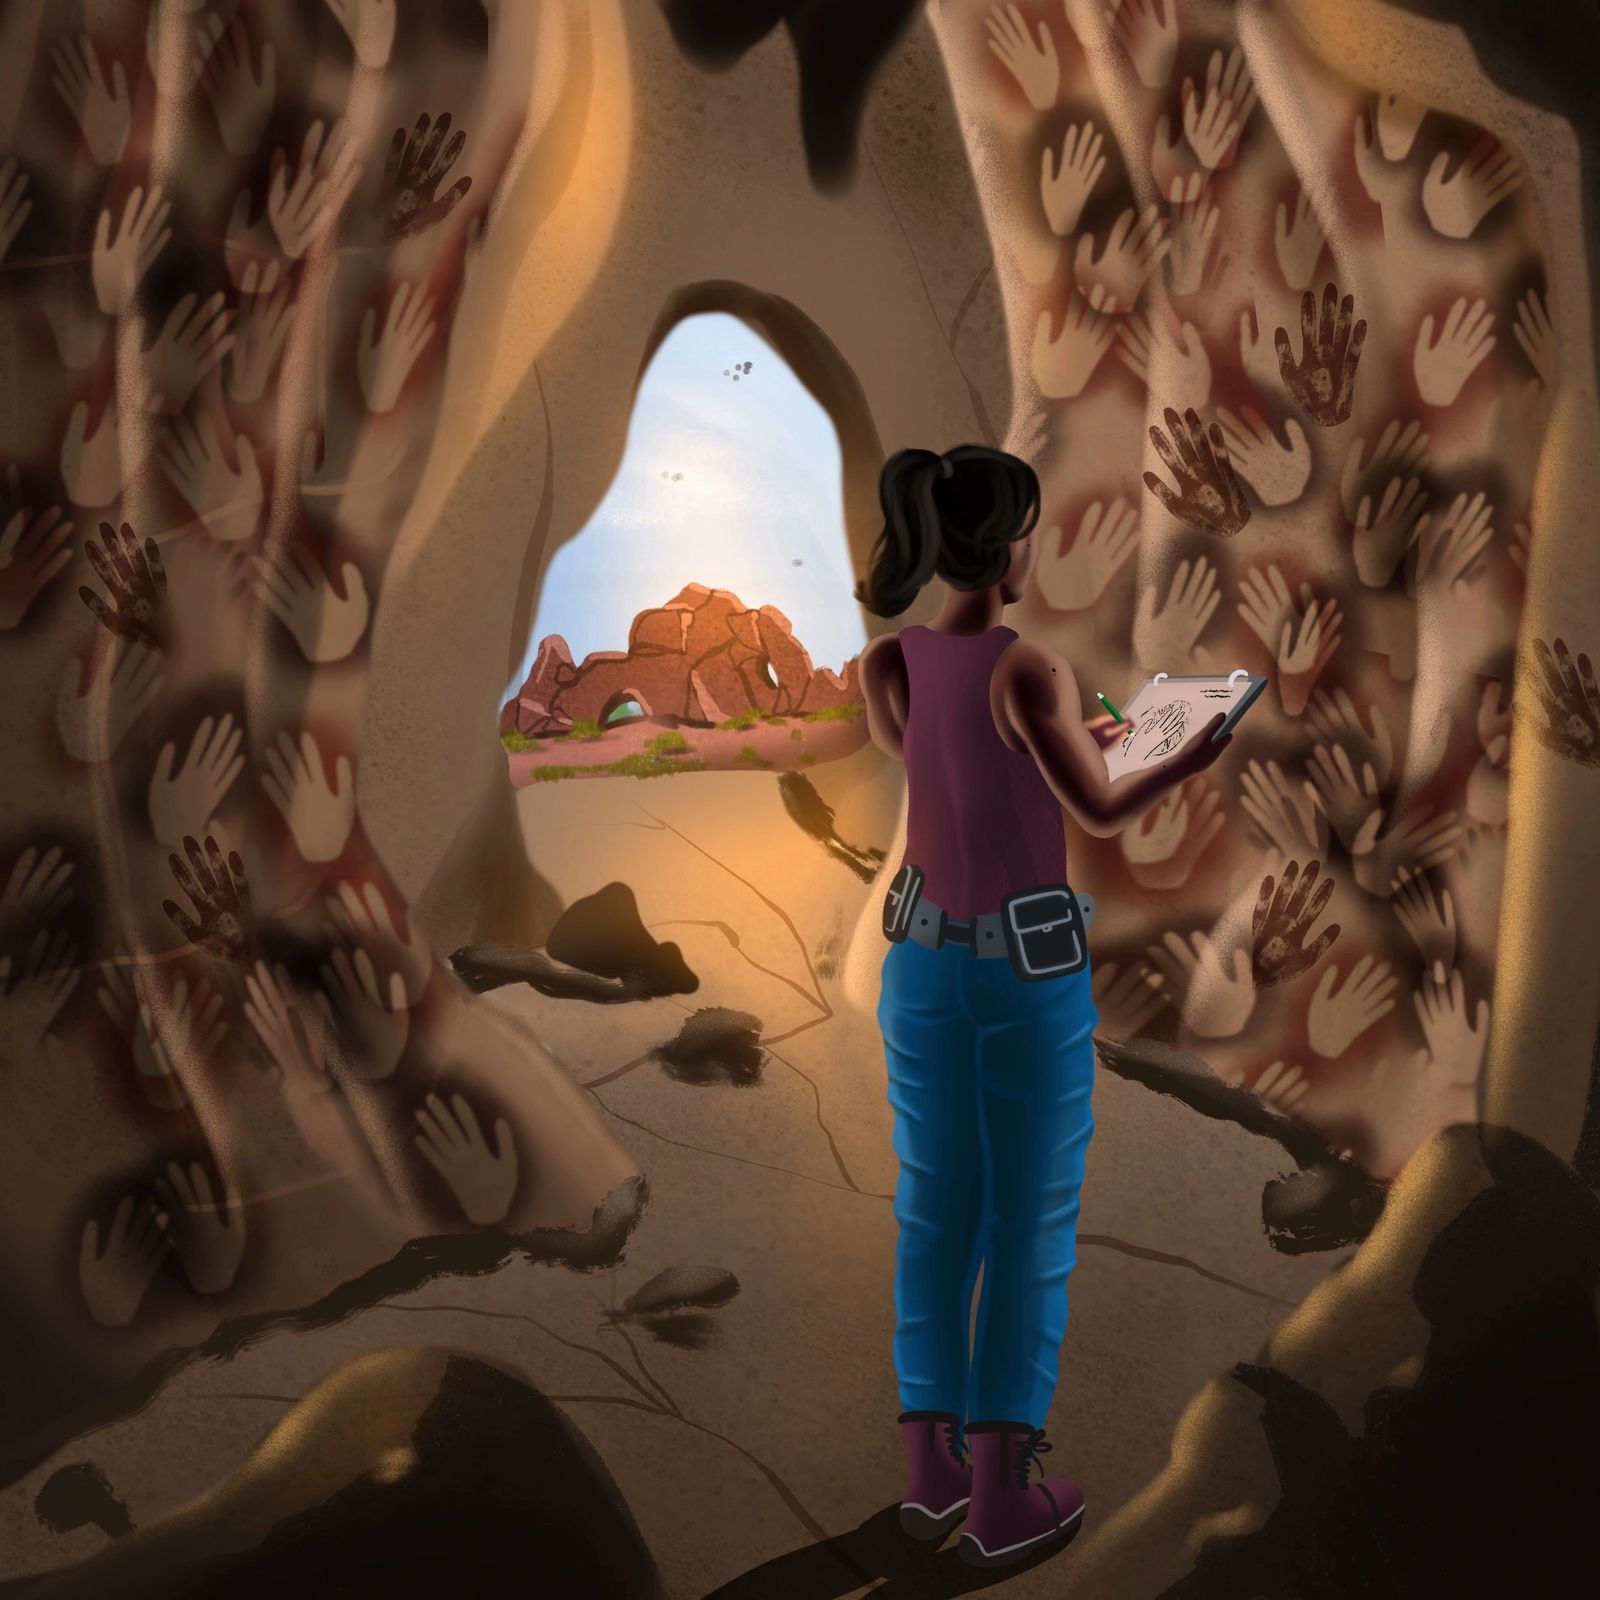 An illustration of a person sketching hand stencils in a cave